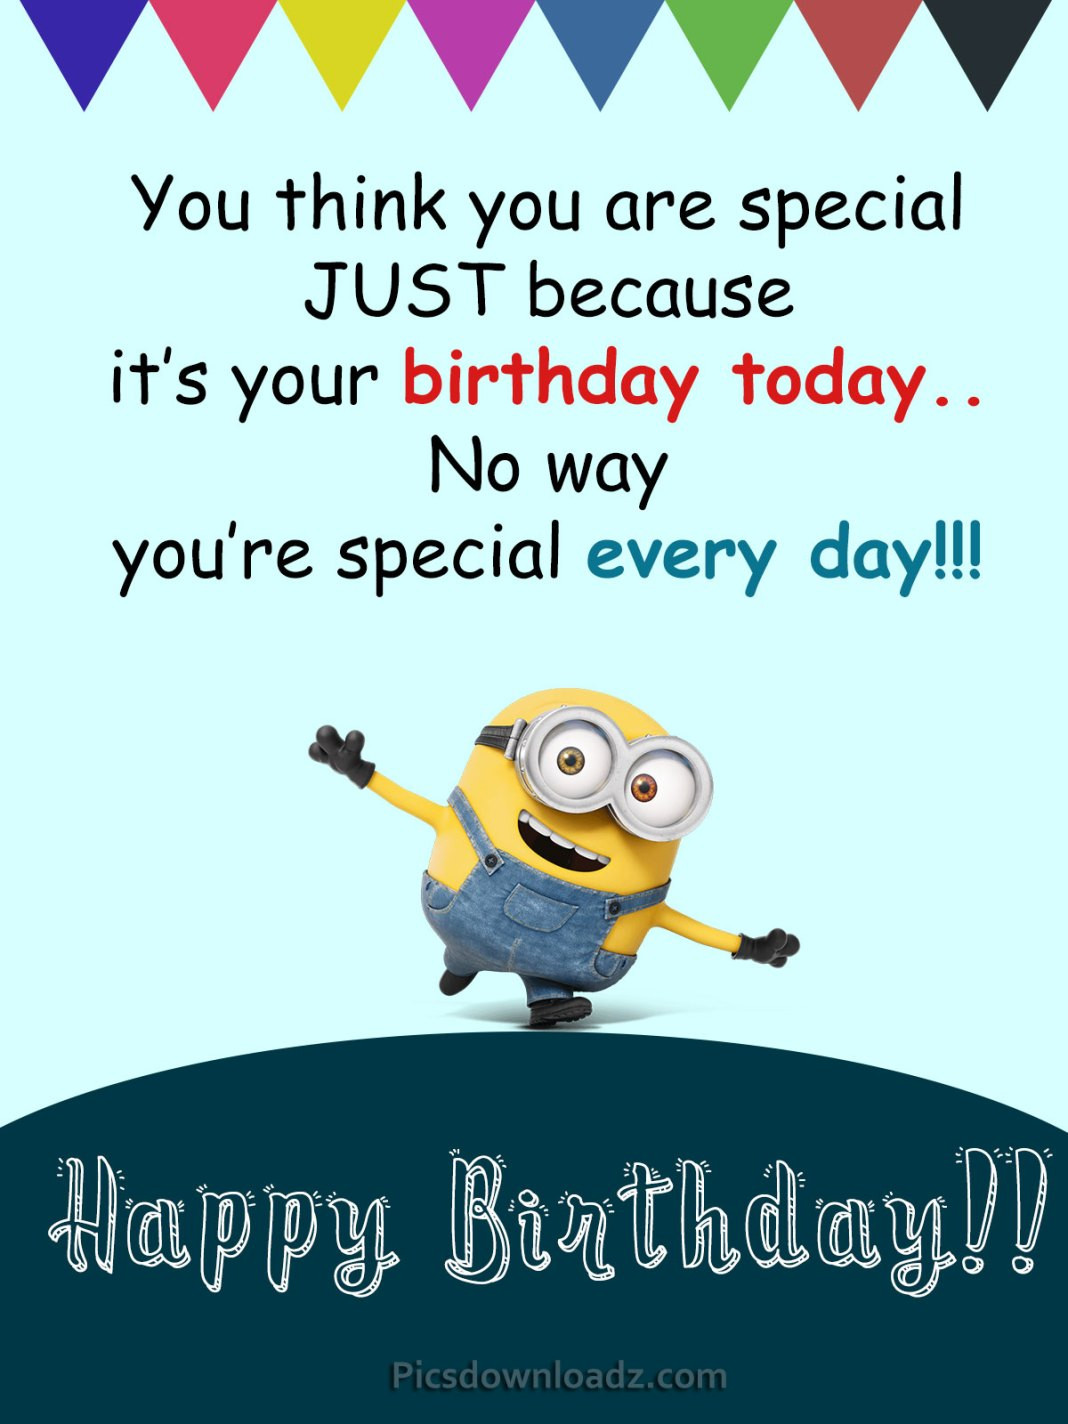 Happy Birthday Quote To A Friend
 Funny Happy Birthday Wishes for Best Friend Happy